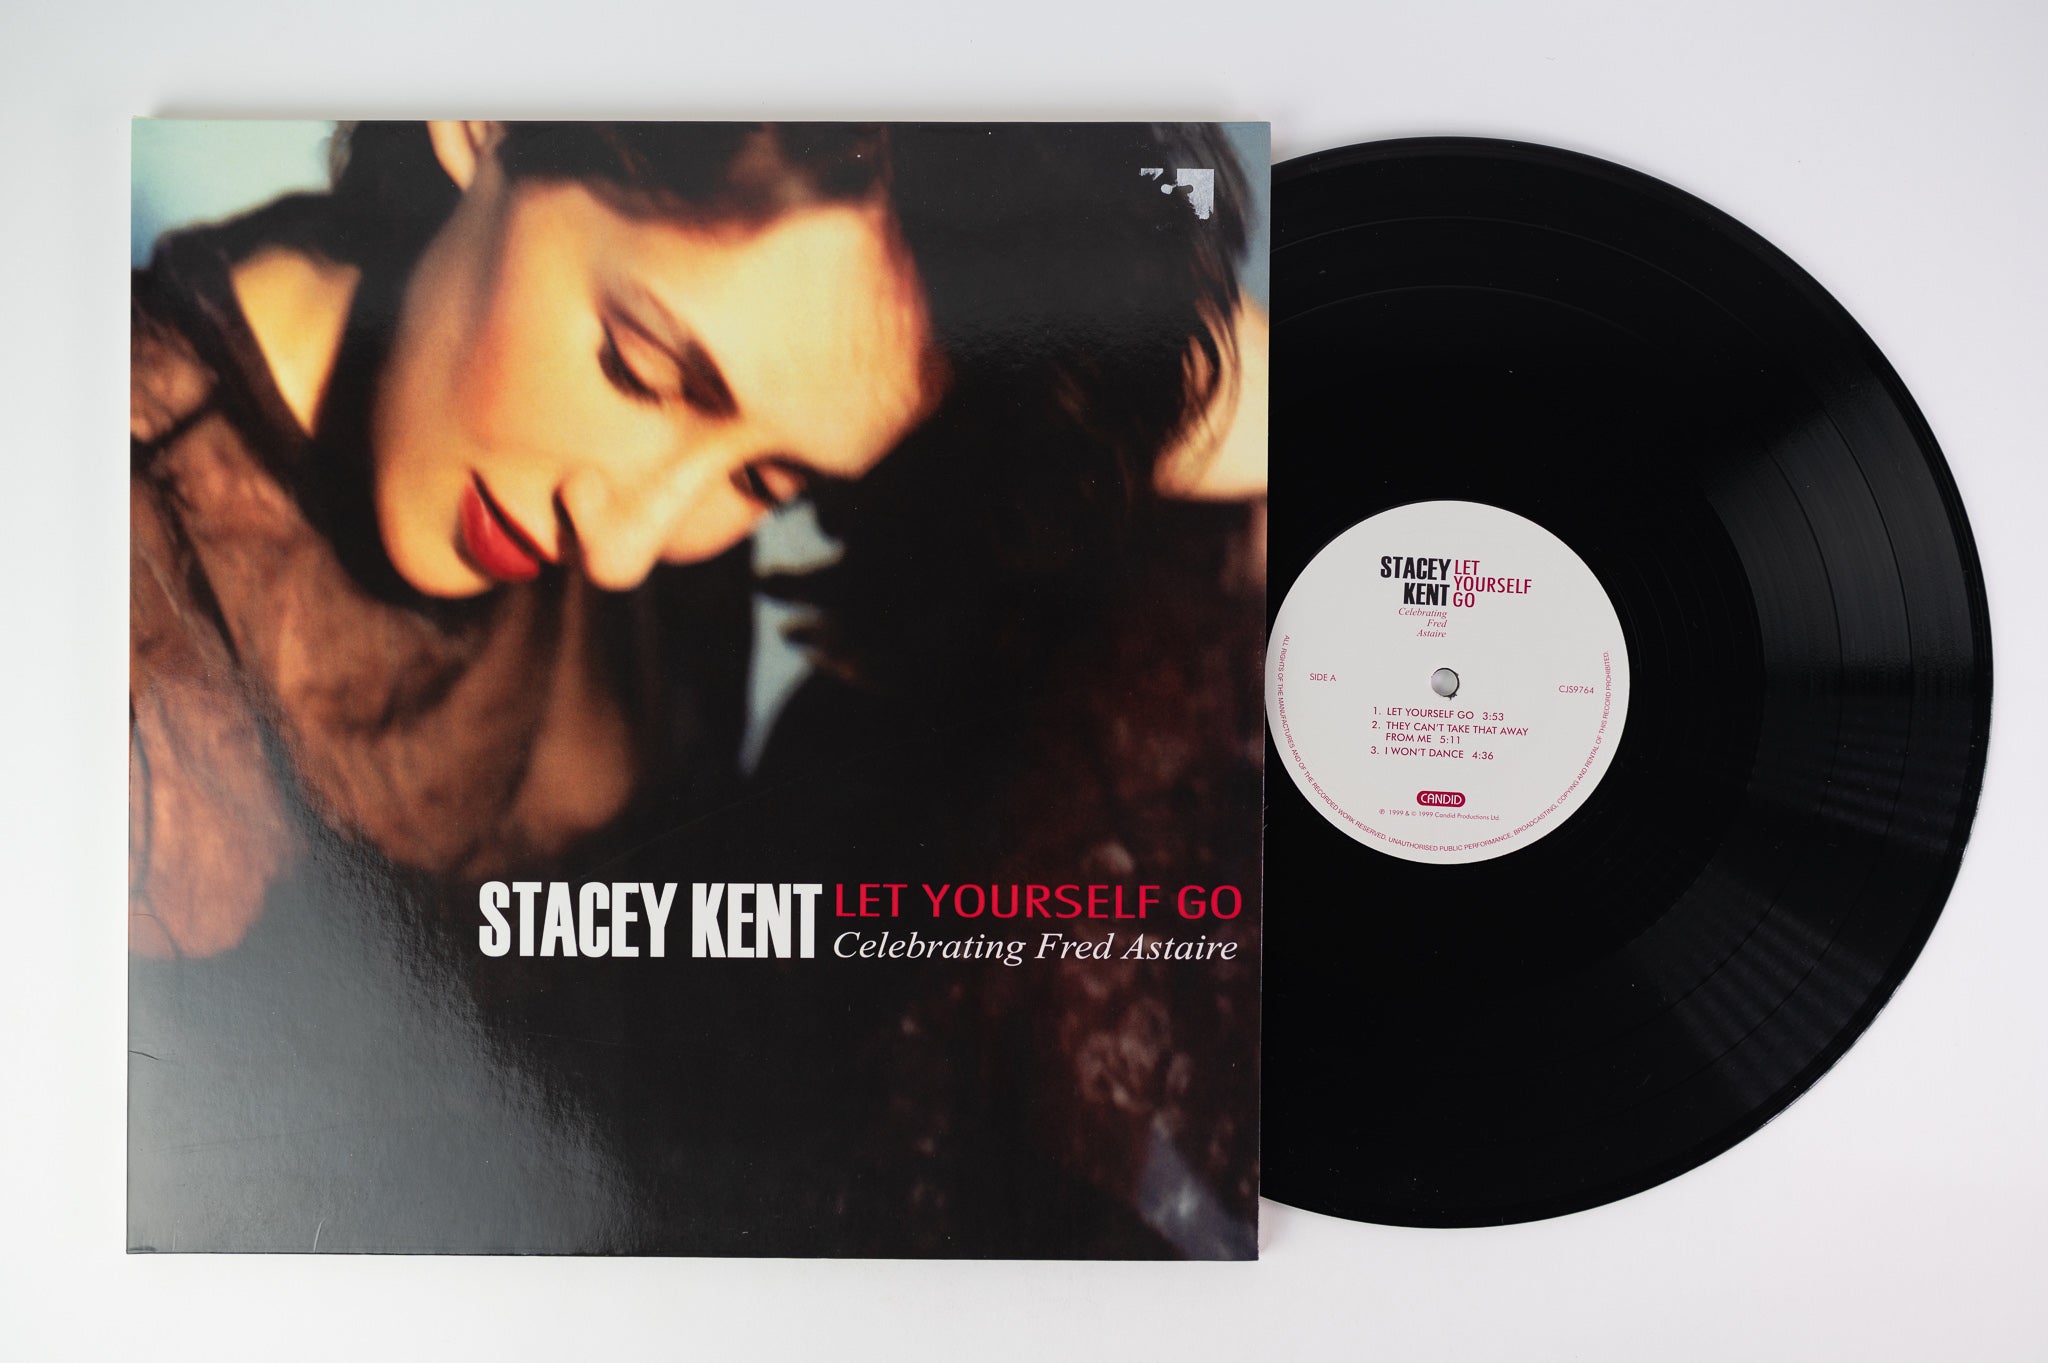 Stacey Kent - Let Yourself Go: Celebrating Fred Astaire on Candid / Pure Pleasure Records